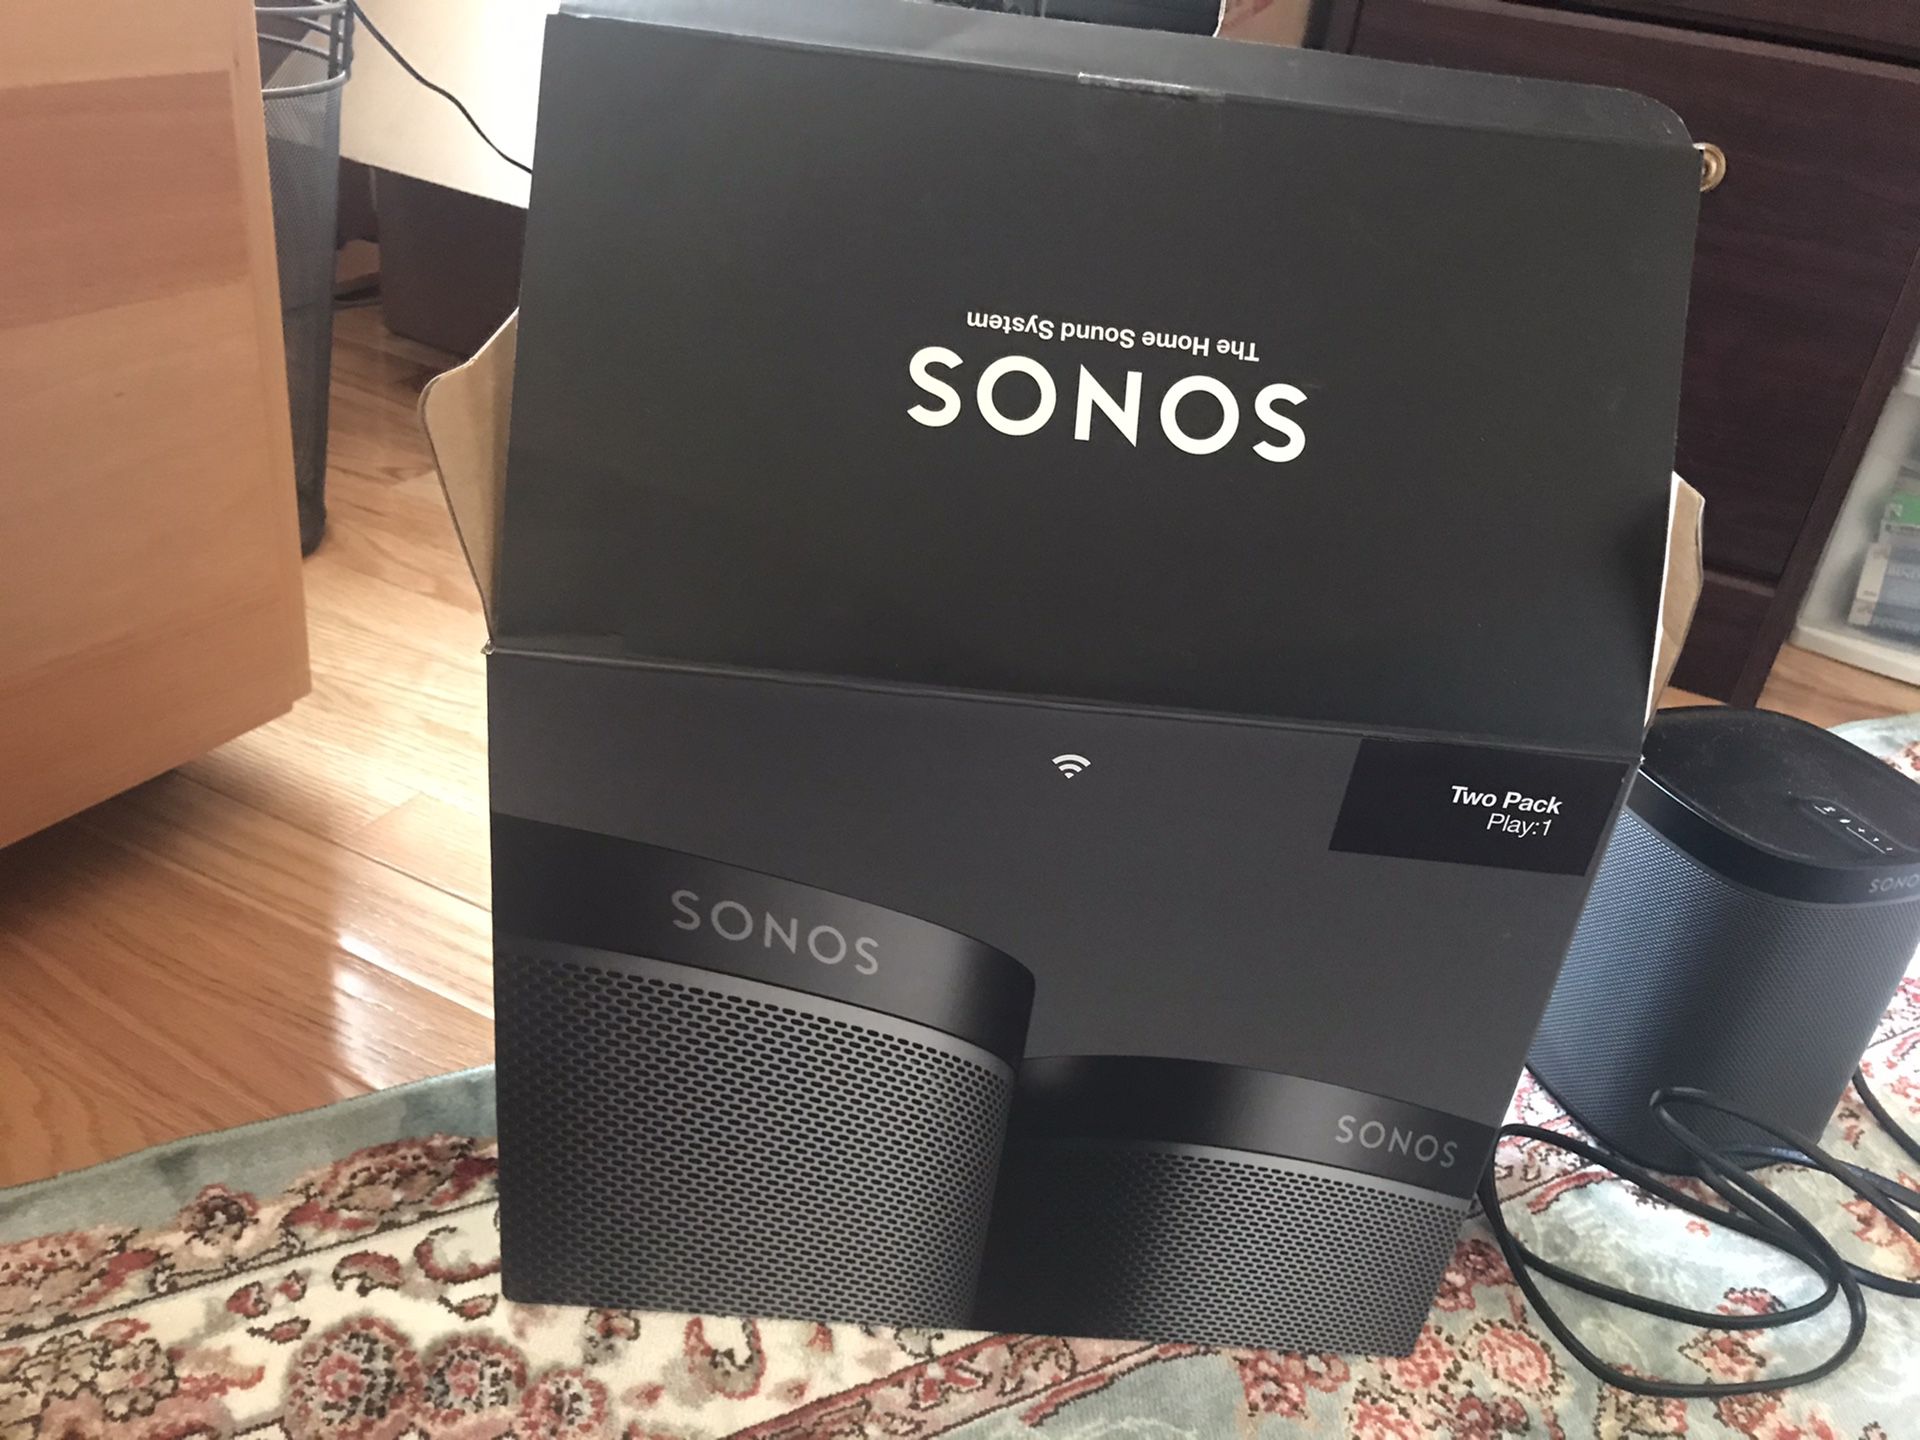 Sonos The Home Sound System - compact Smart Speaker